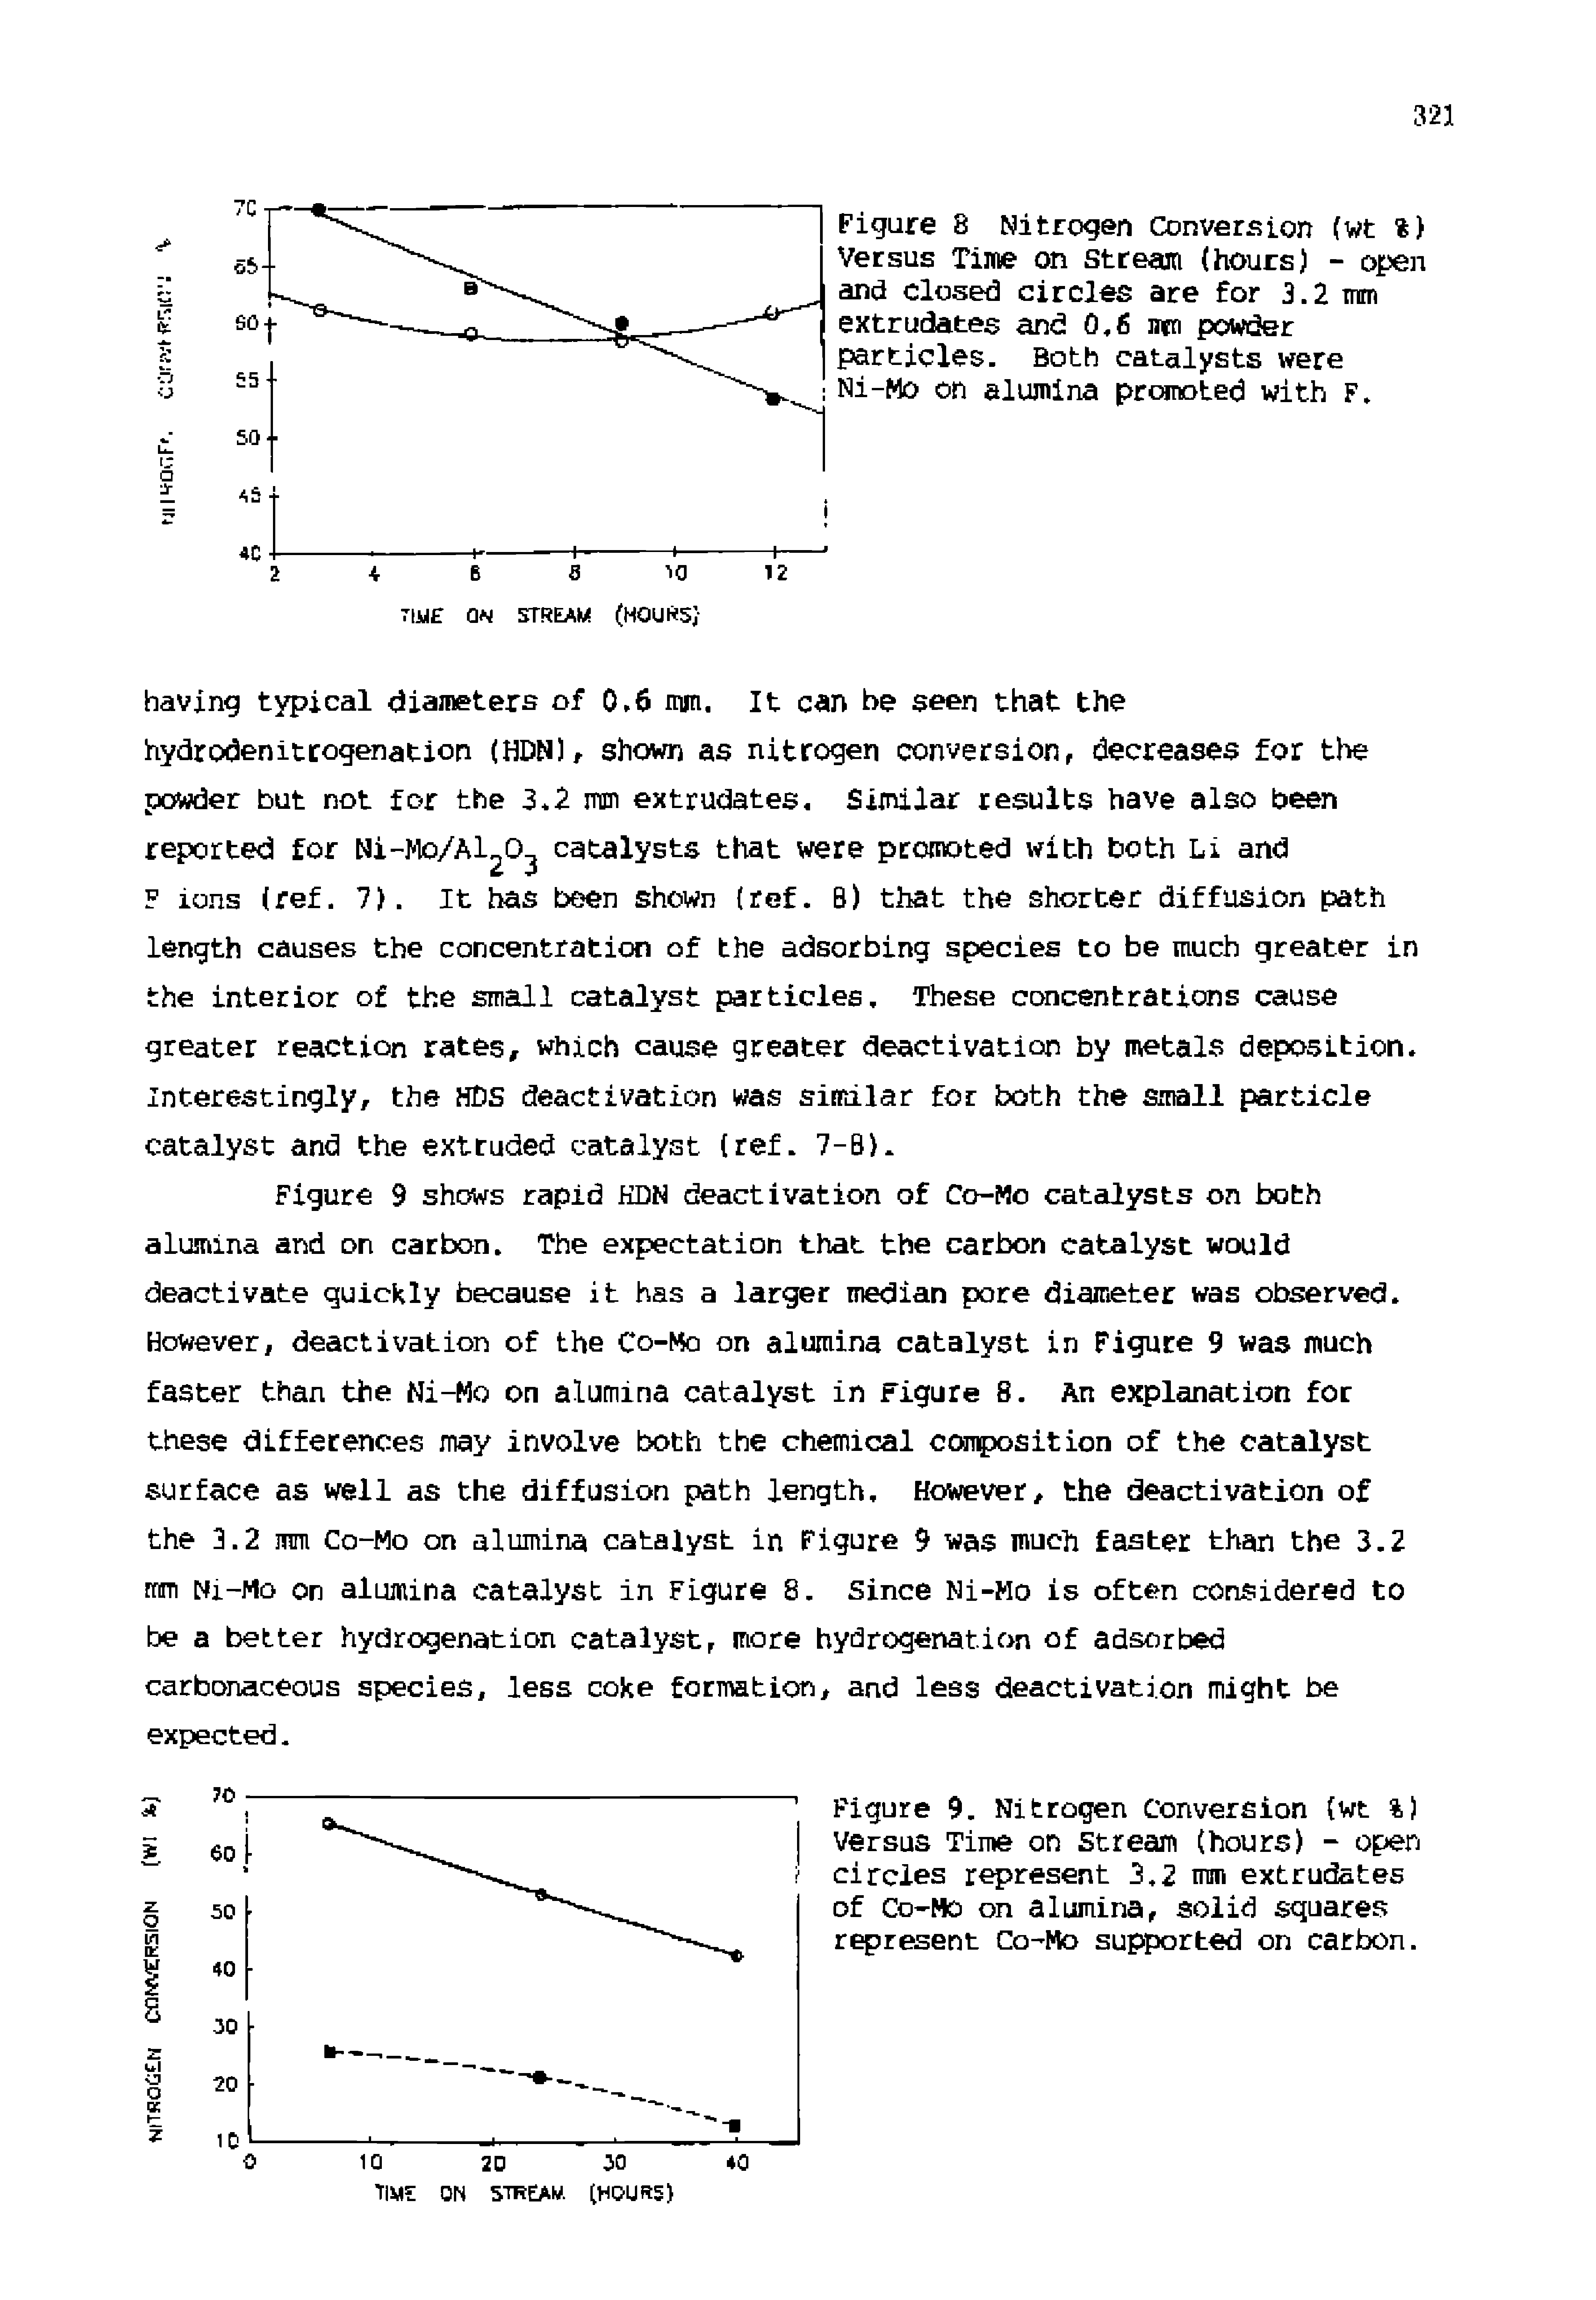 Figure 9 shows rapid KDN deactivation of Co-Mo catalysts on both alumina and on carbon. The expectation that the carbon catalyst would deactivate quickly because it has a larger median pore diameter was observed. However, deactivation of the Co-Mo on alumina catalyst in Figure 9 was much faster than the Ni-Mo on alumina catalyst in Figure 8. An explanation for these differences may involve both the chemical coanposition of the catalyst surface as well as the diffusion path length. However, the deactivation of the 3.2 mm Co-Mo on alumina catalyst in Figure 9 was much faster than the 3.2 mm Ni-Mo on almnina catalyst in Figure 8. Since Ni-Mo is often considered to be a better hydrogenation catalyst more hydrogenation of adsorbed carbonaceous species, less coke formation, and less deactivation might be expected.